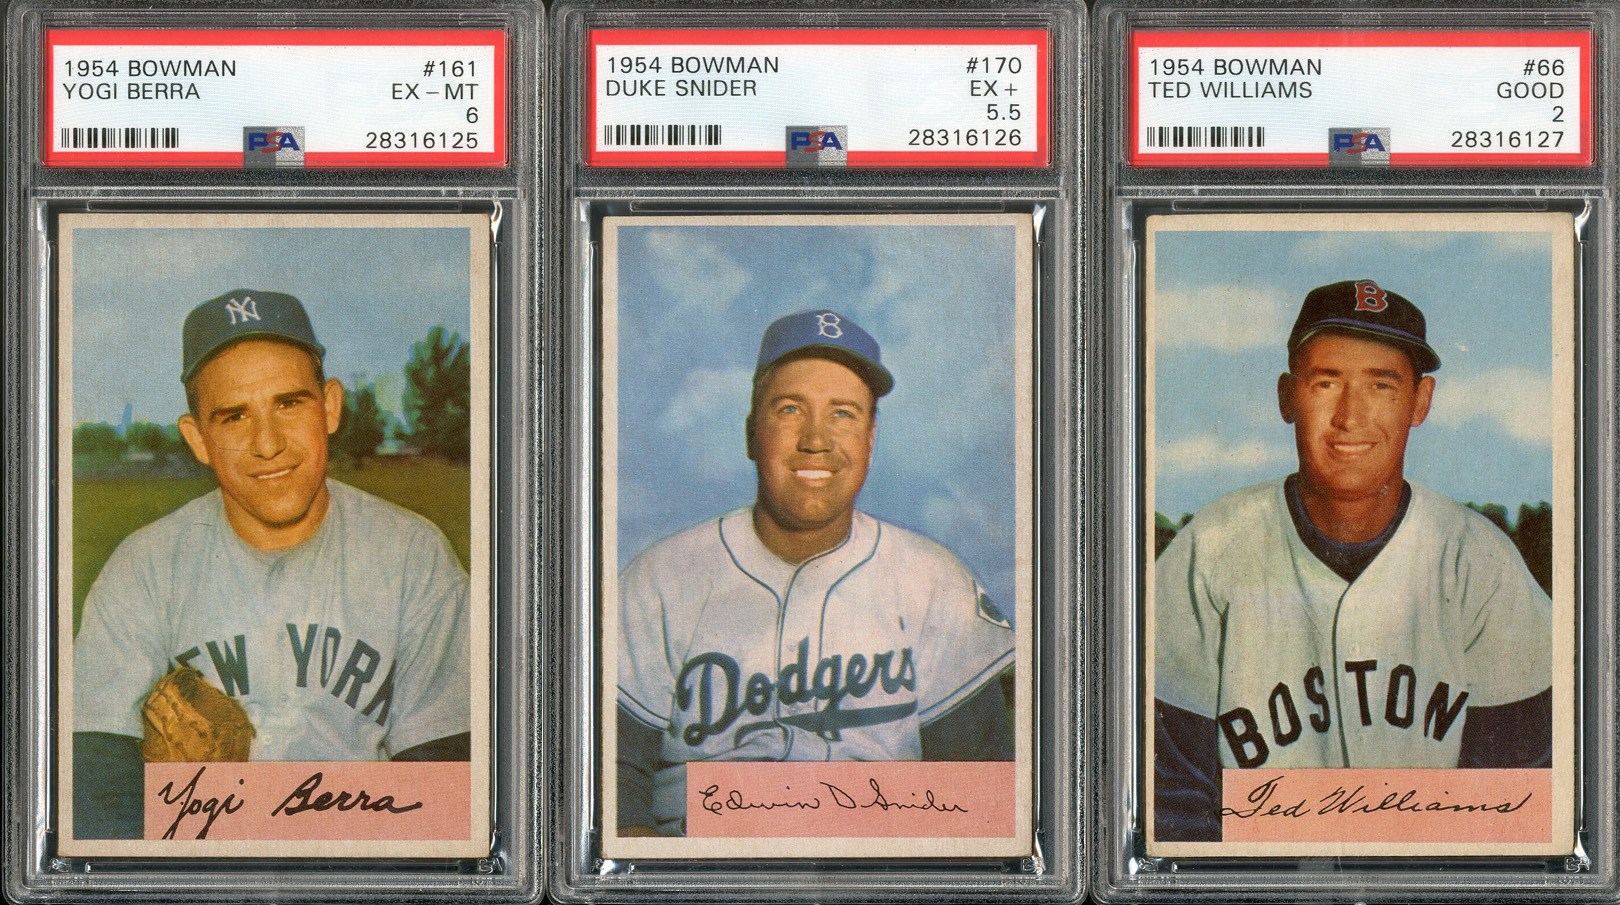 Baseball and Trading Cards - 1954 Bowman Complete Set of 225 Cards including #66 Ted Williams with PSA Graded!